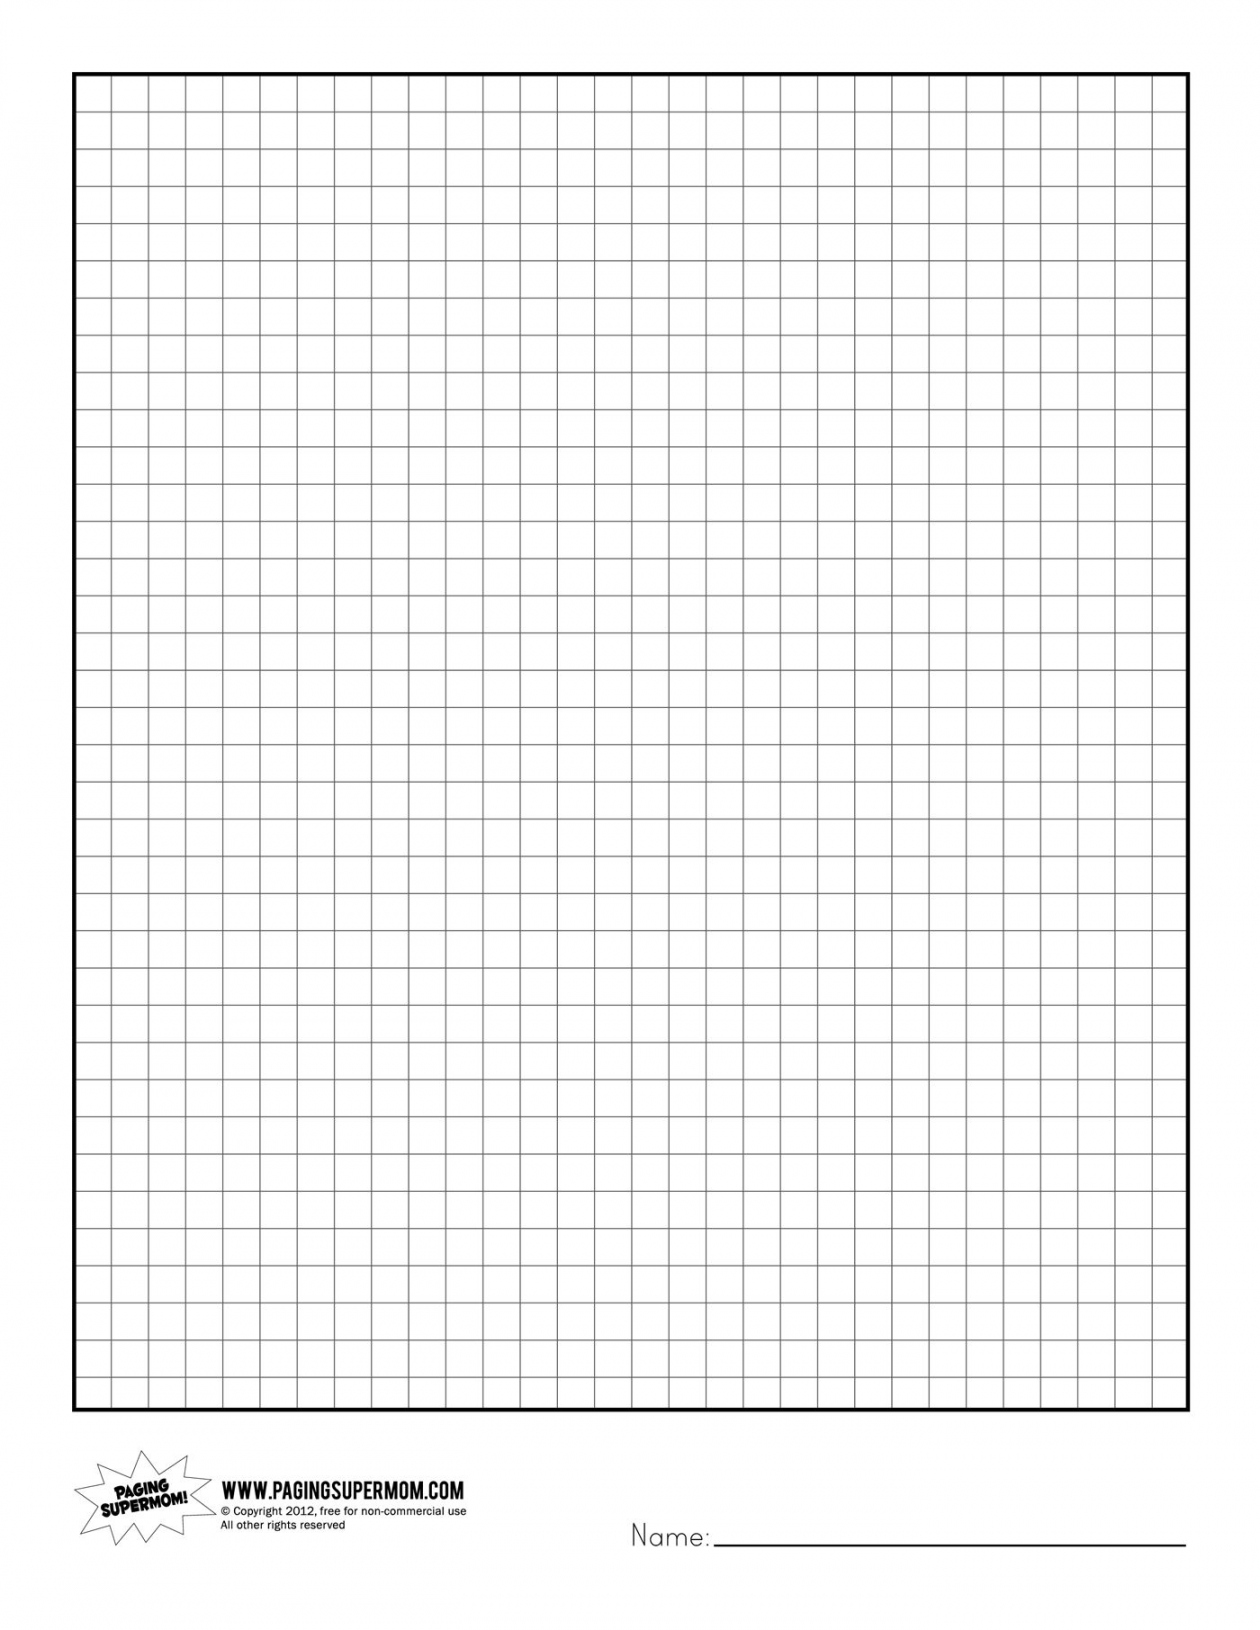 Pin on Healthy eating - FREE Printables - Graph Paper To Print Free